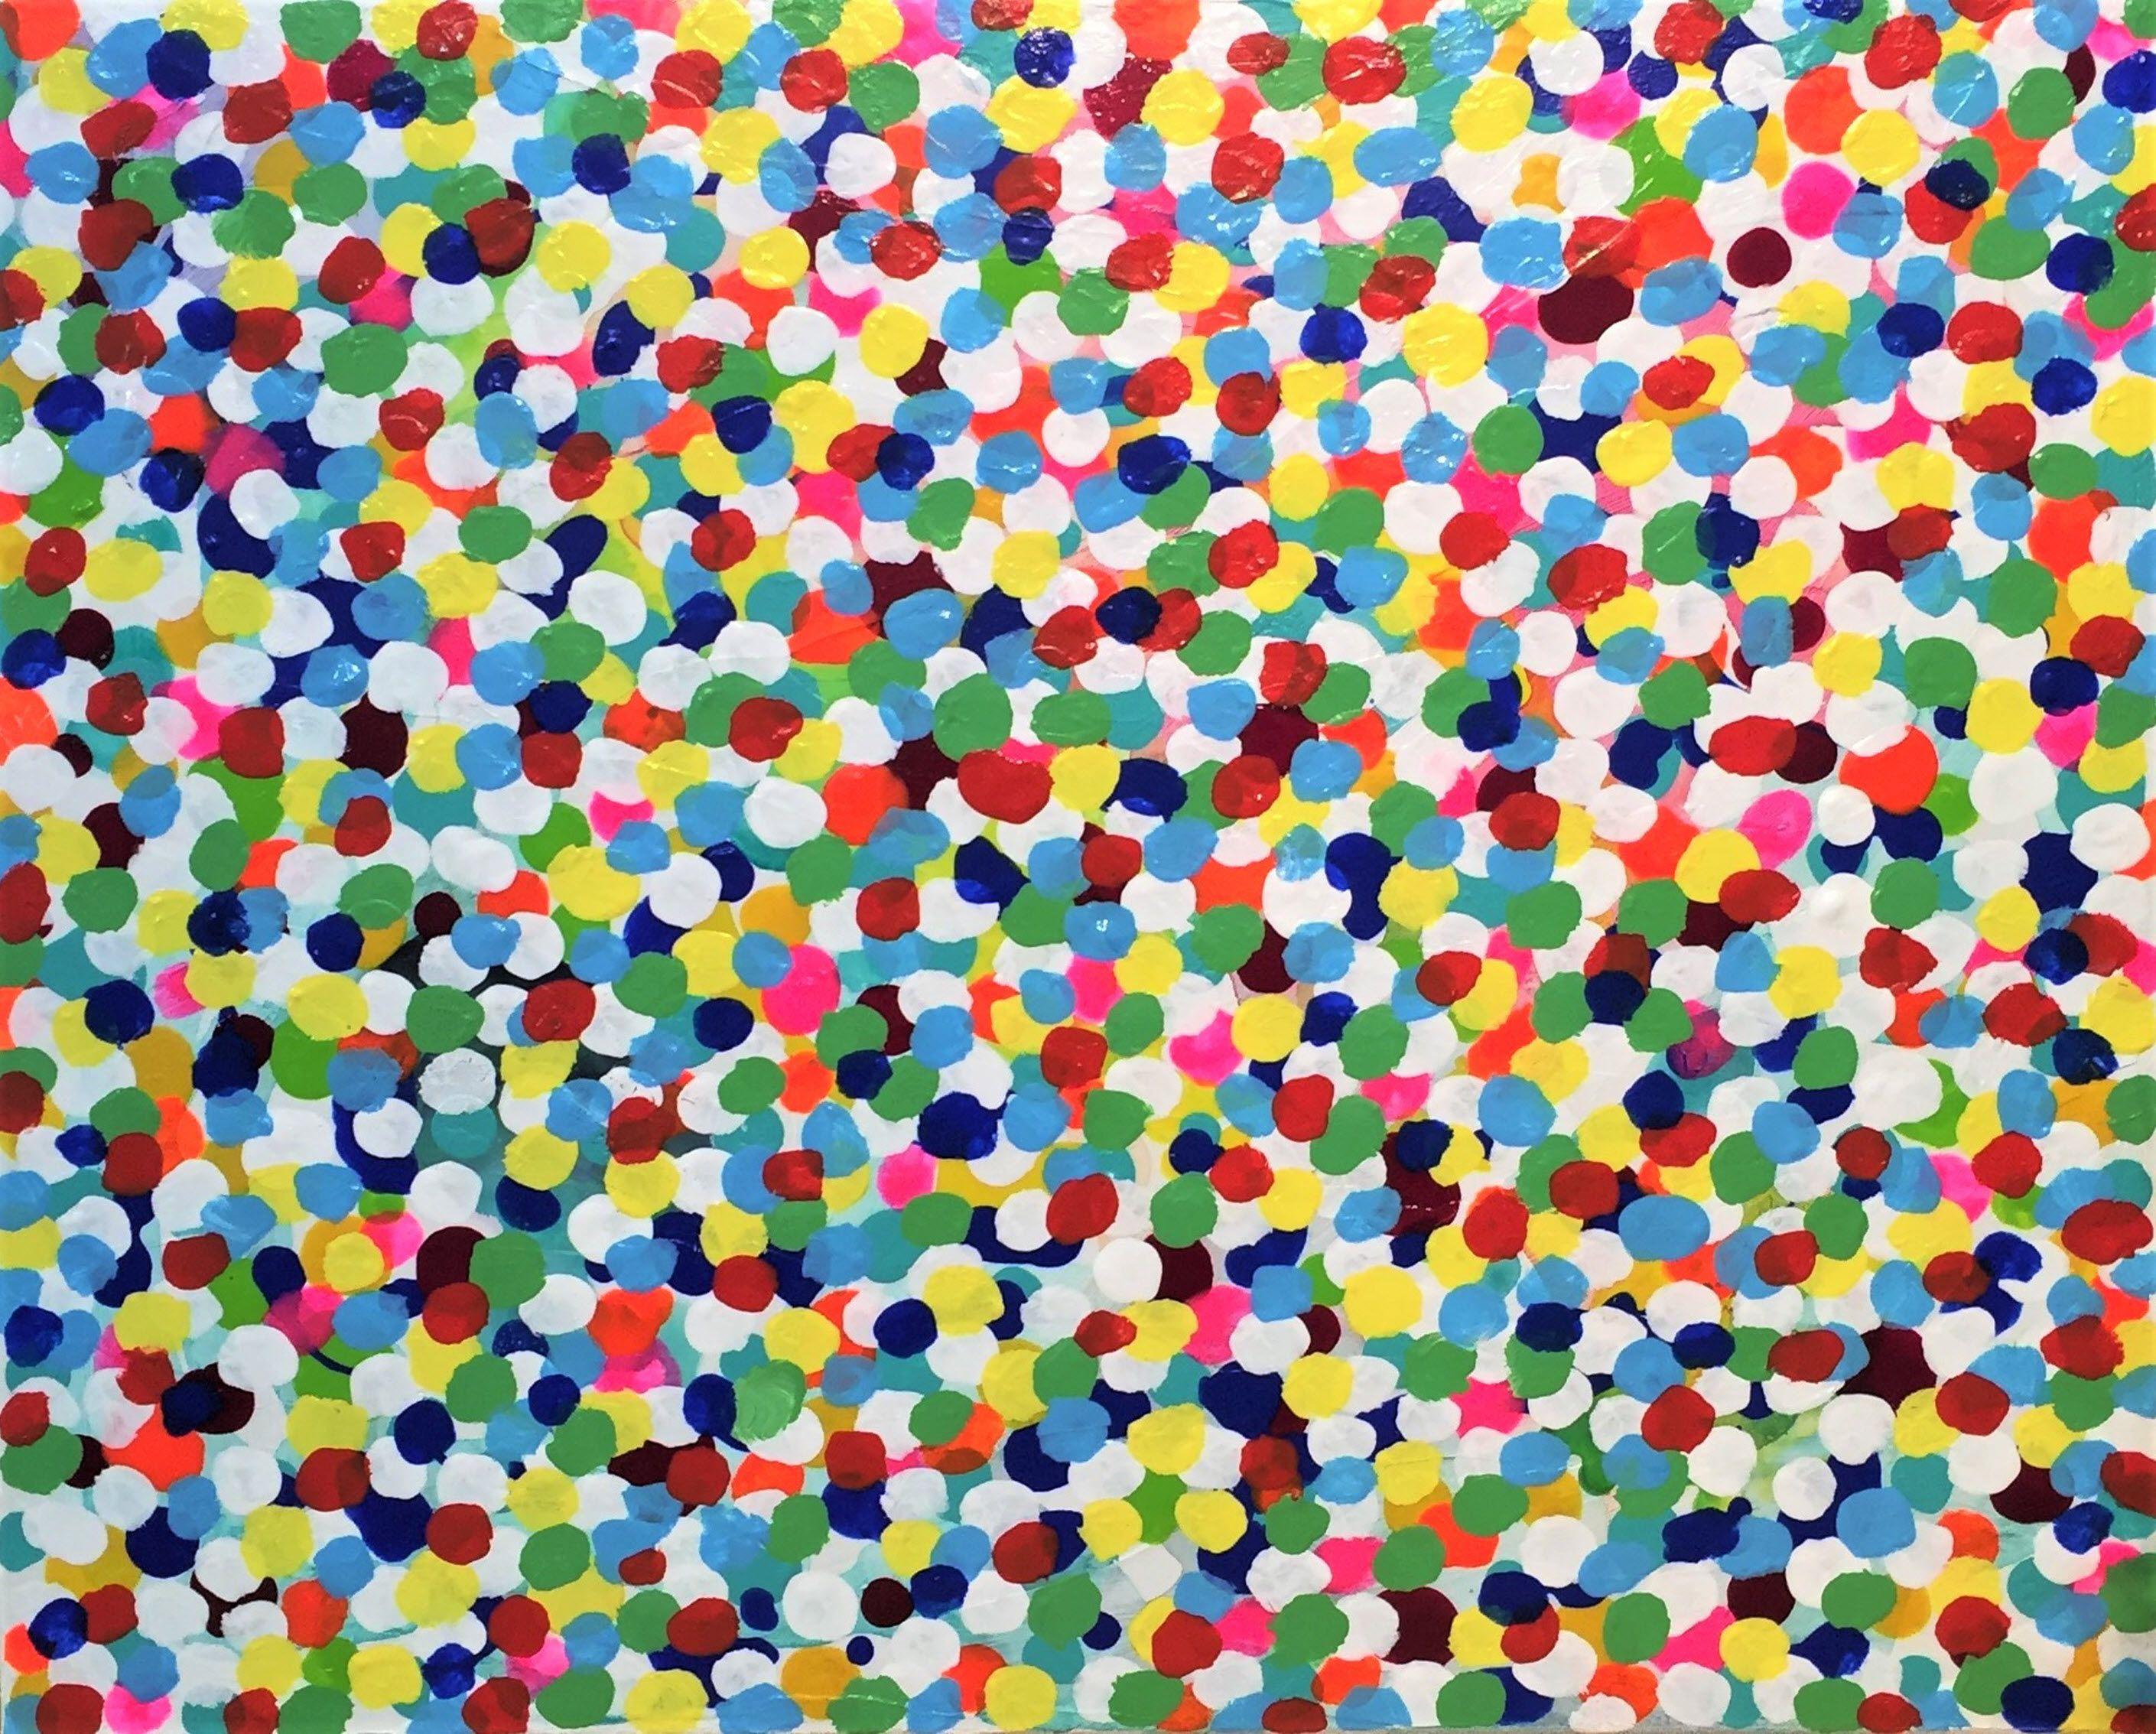 Cristina Stefan Abstract Painting - Summer dot by dot, Painting, Acrylic on Canvas